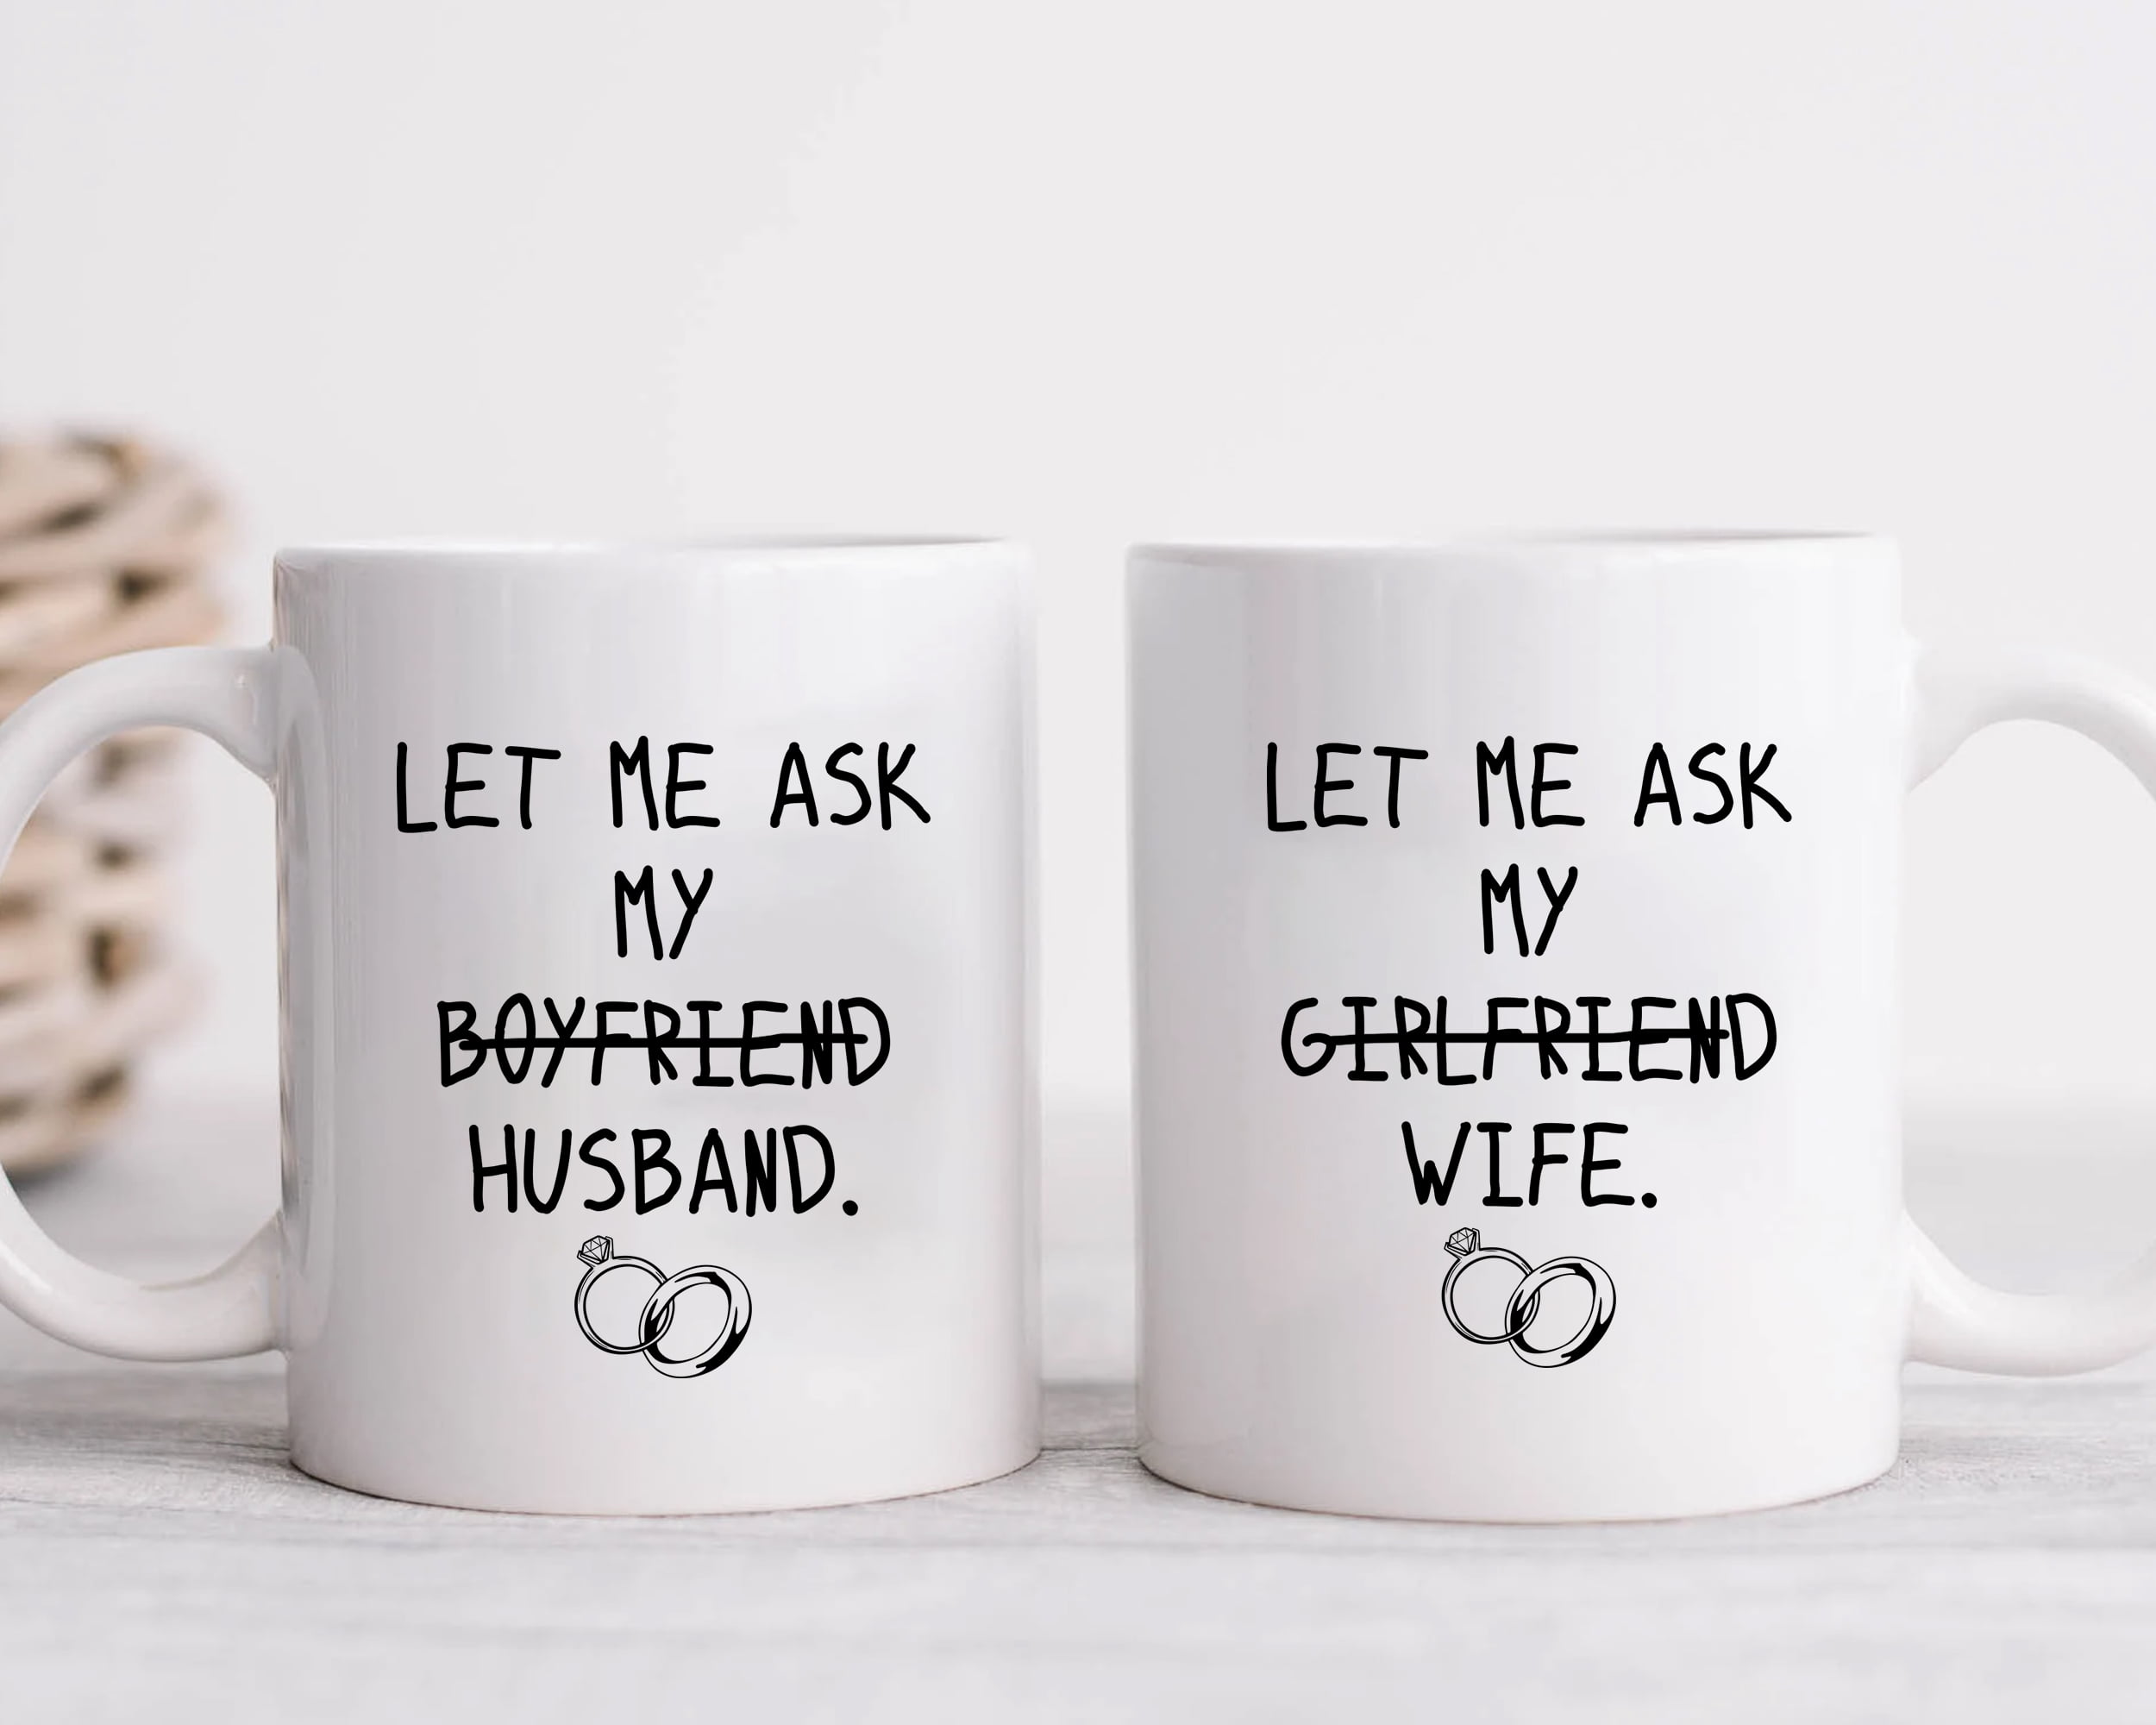 AW BRIDAL Ceramic Engagement Gifts For Couples Newly Engaged Unique Coffee  Mugs Set Of 2, 12 Oz| Bac…See more AW BRIDAL Ceramic Engagement Gifts For